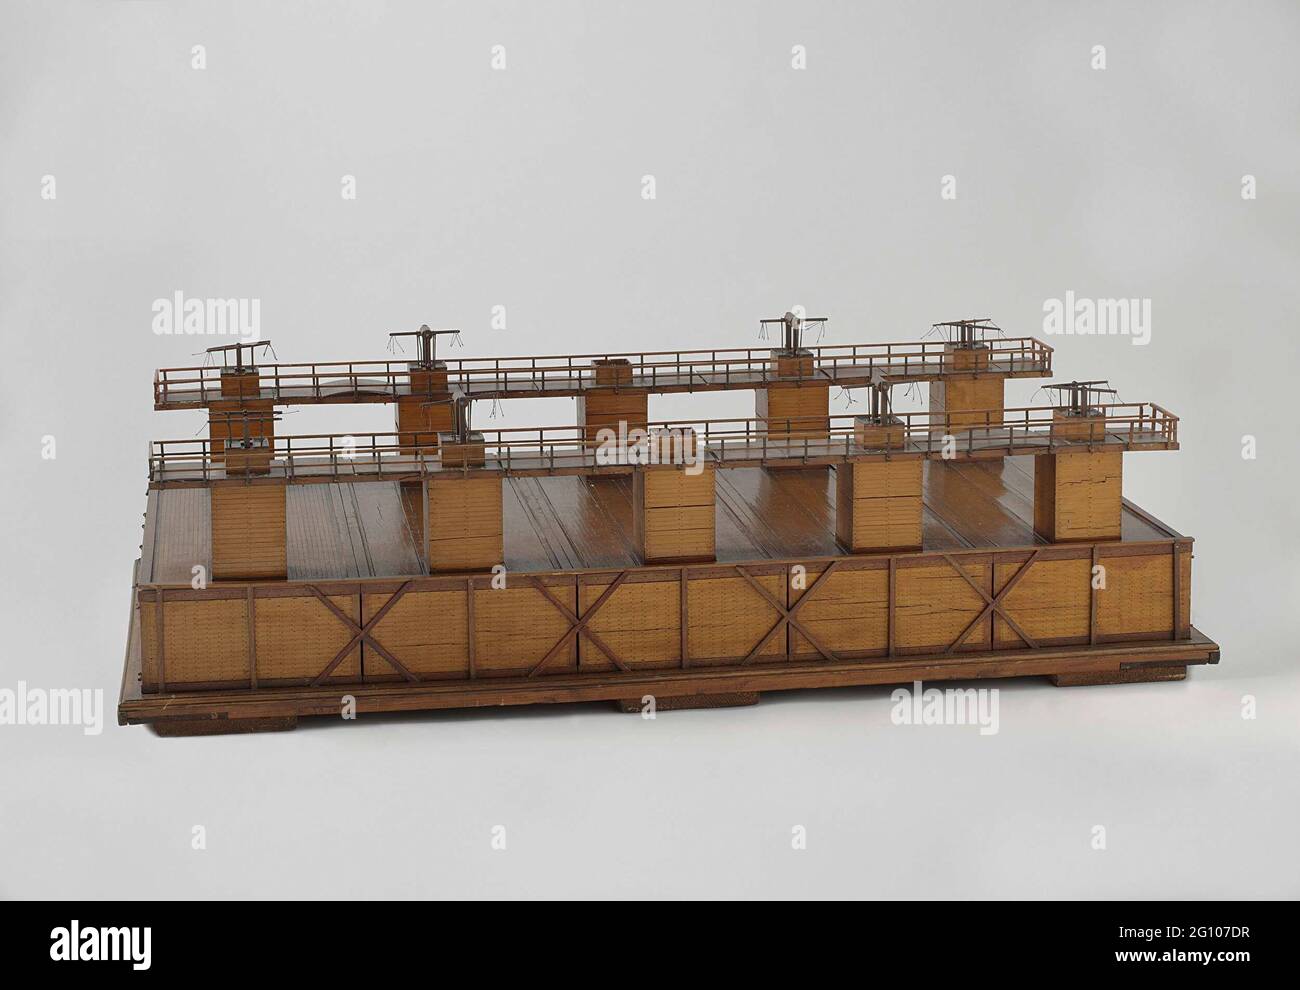 Model of a Floating Dry Dock. Model of a floating dry dock, on a ground  plan. It consists of five parts that are connected to each other. Each part  is a rectangular